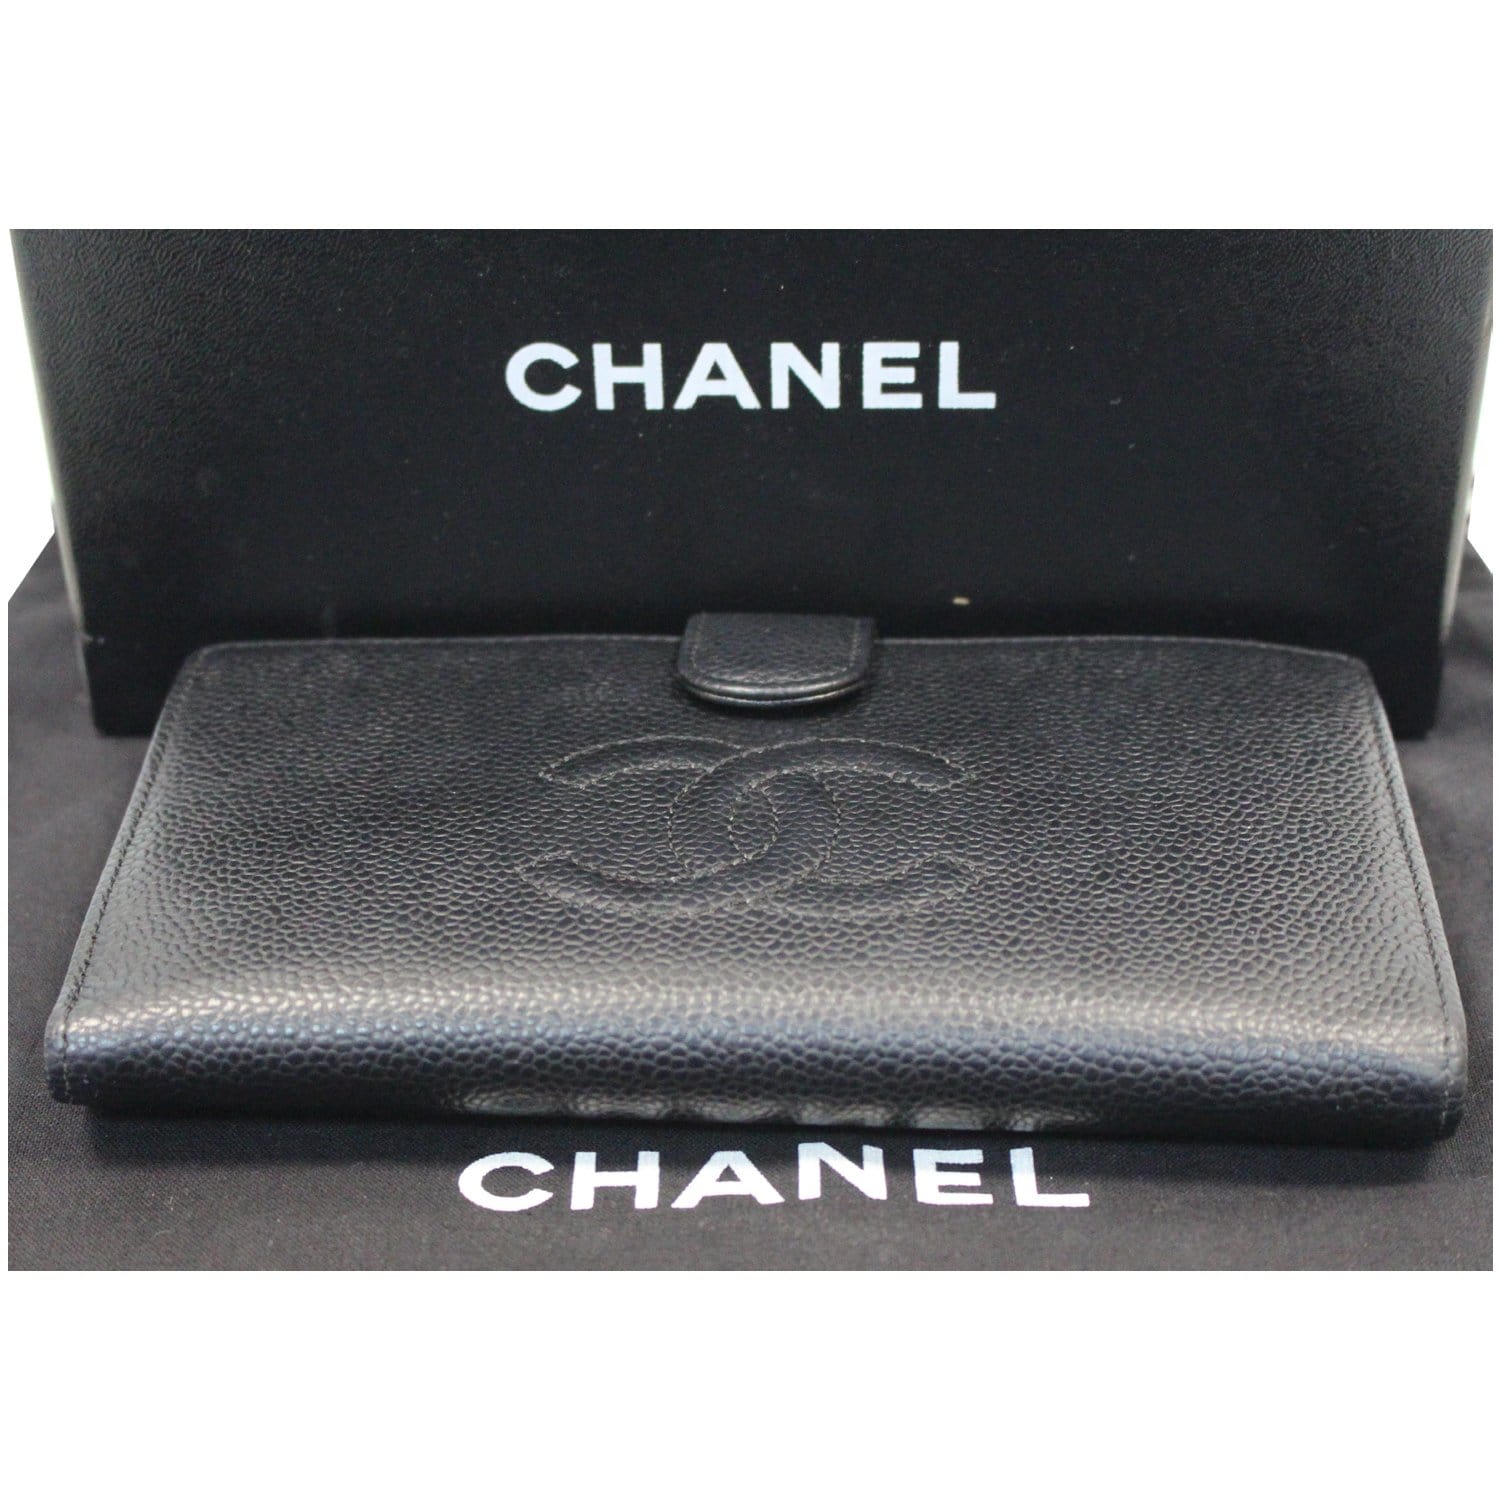 CHANEL Authentic Black Caviar Leather Long Wallet Made in France